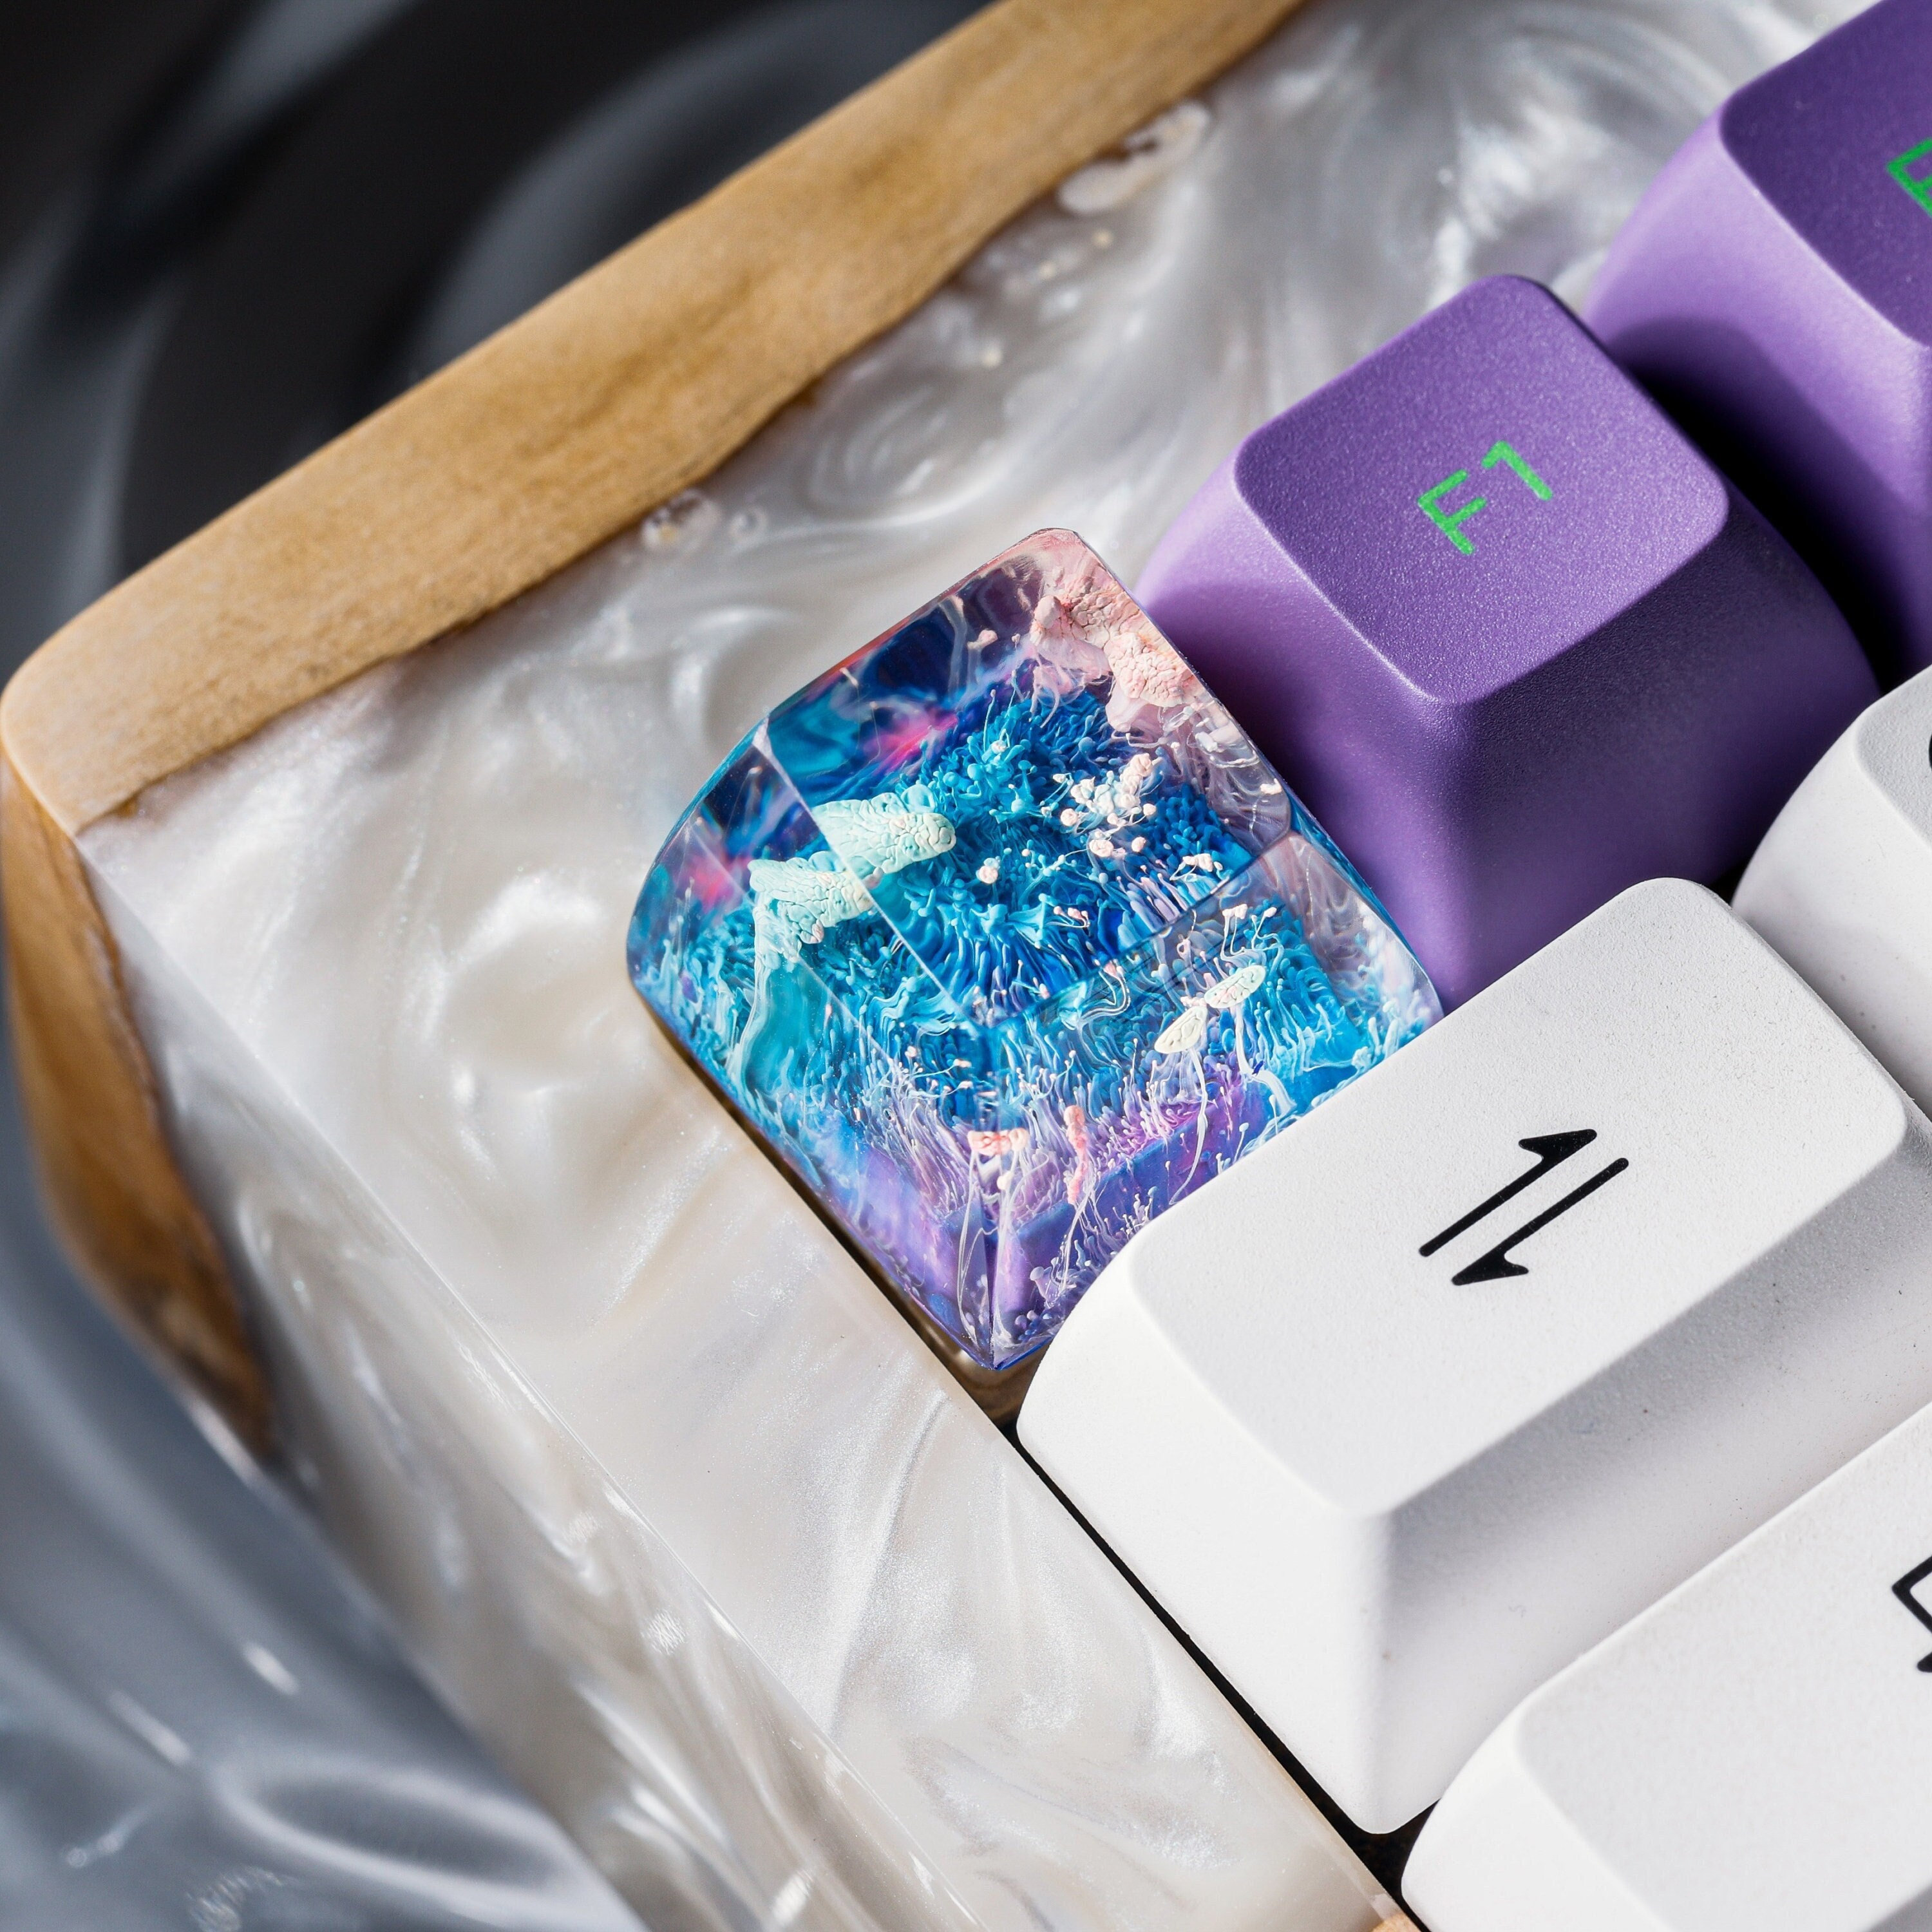 Coral Keycap, Pink & Blue Keycap, Ocean Keycap, Keycap For Cherry MX Switches Mechanical Keyboard, Handmade Gift